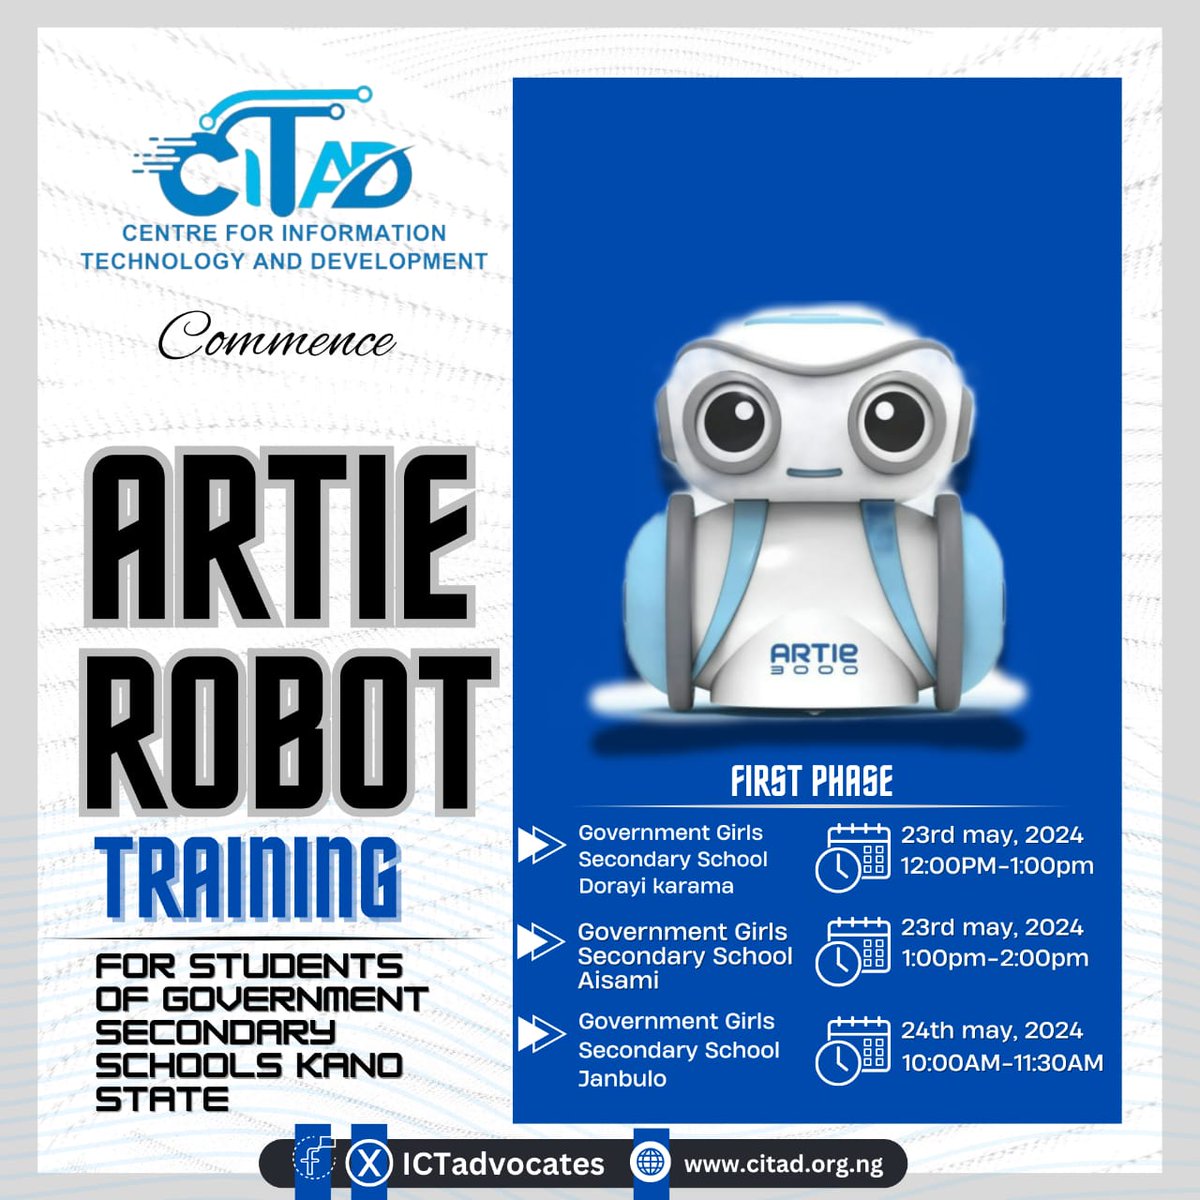 On Thursday 23 May, 2024, @ICTAdvocates is launching #Artie #Robot and coding training for young girls students in Kano state! Exciting times ahead for tech education and innovation. #TechEducation #CodingForKids #KanoState @IsahAzare2 @YZYau @Zainab_SUM